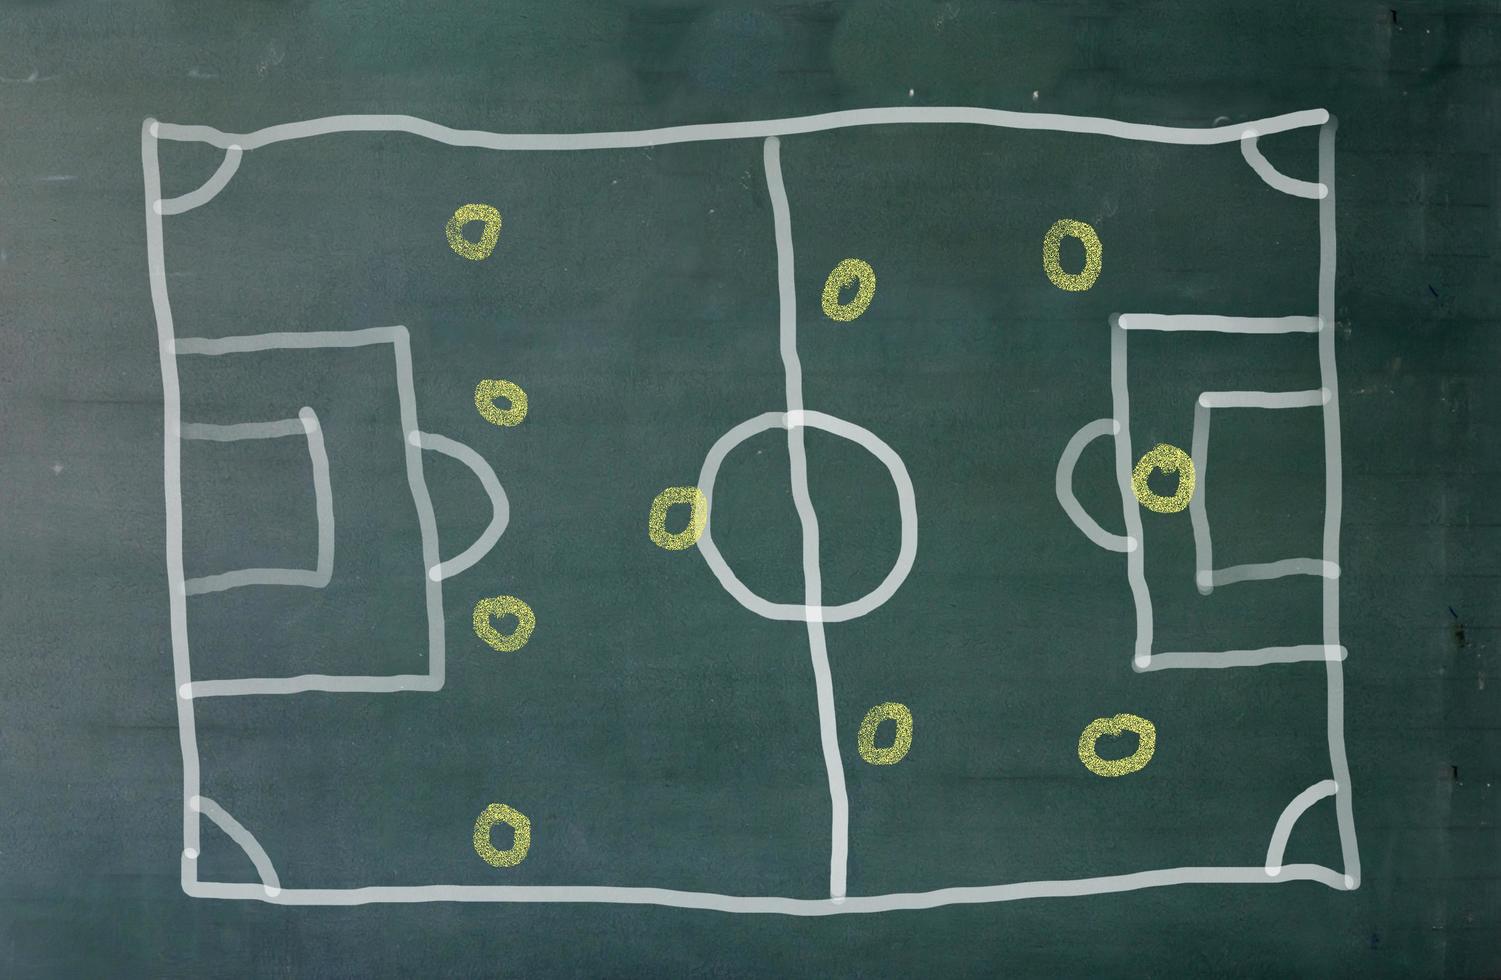 Soccer play positions on chalkboard photo